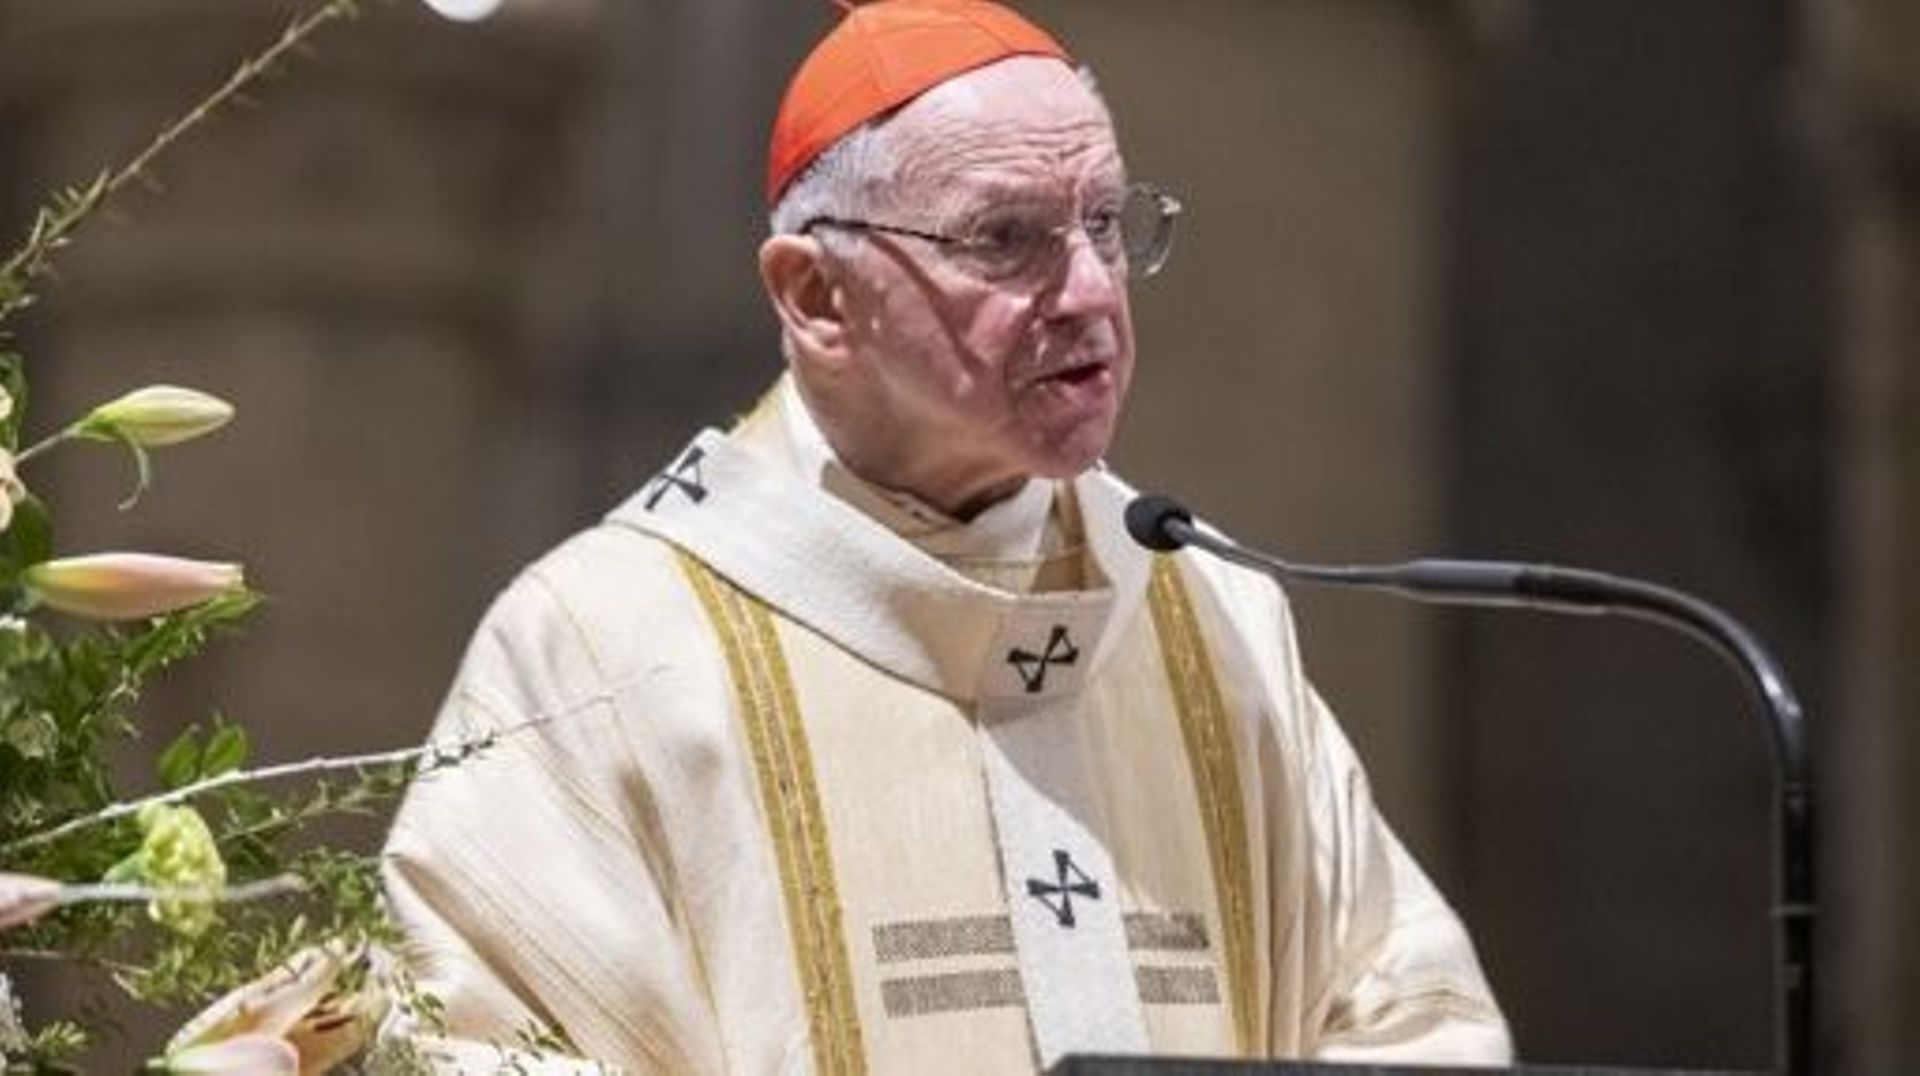 Cardinal and Archbishop Jozef De Kesel pictured during the celebration of the Midnight mass on Christmas eve at the 'Kathedraal van Sint-Michiel en Sint-Goedele - Cathedrale Saints-Michel-et-Gudule - St. Michael and St. Gudula' Cathedral in Brussels, Satu